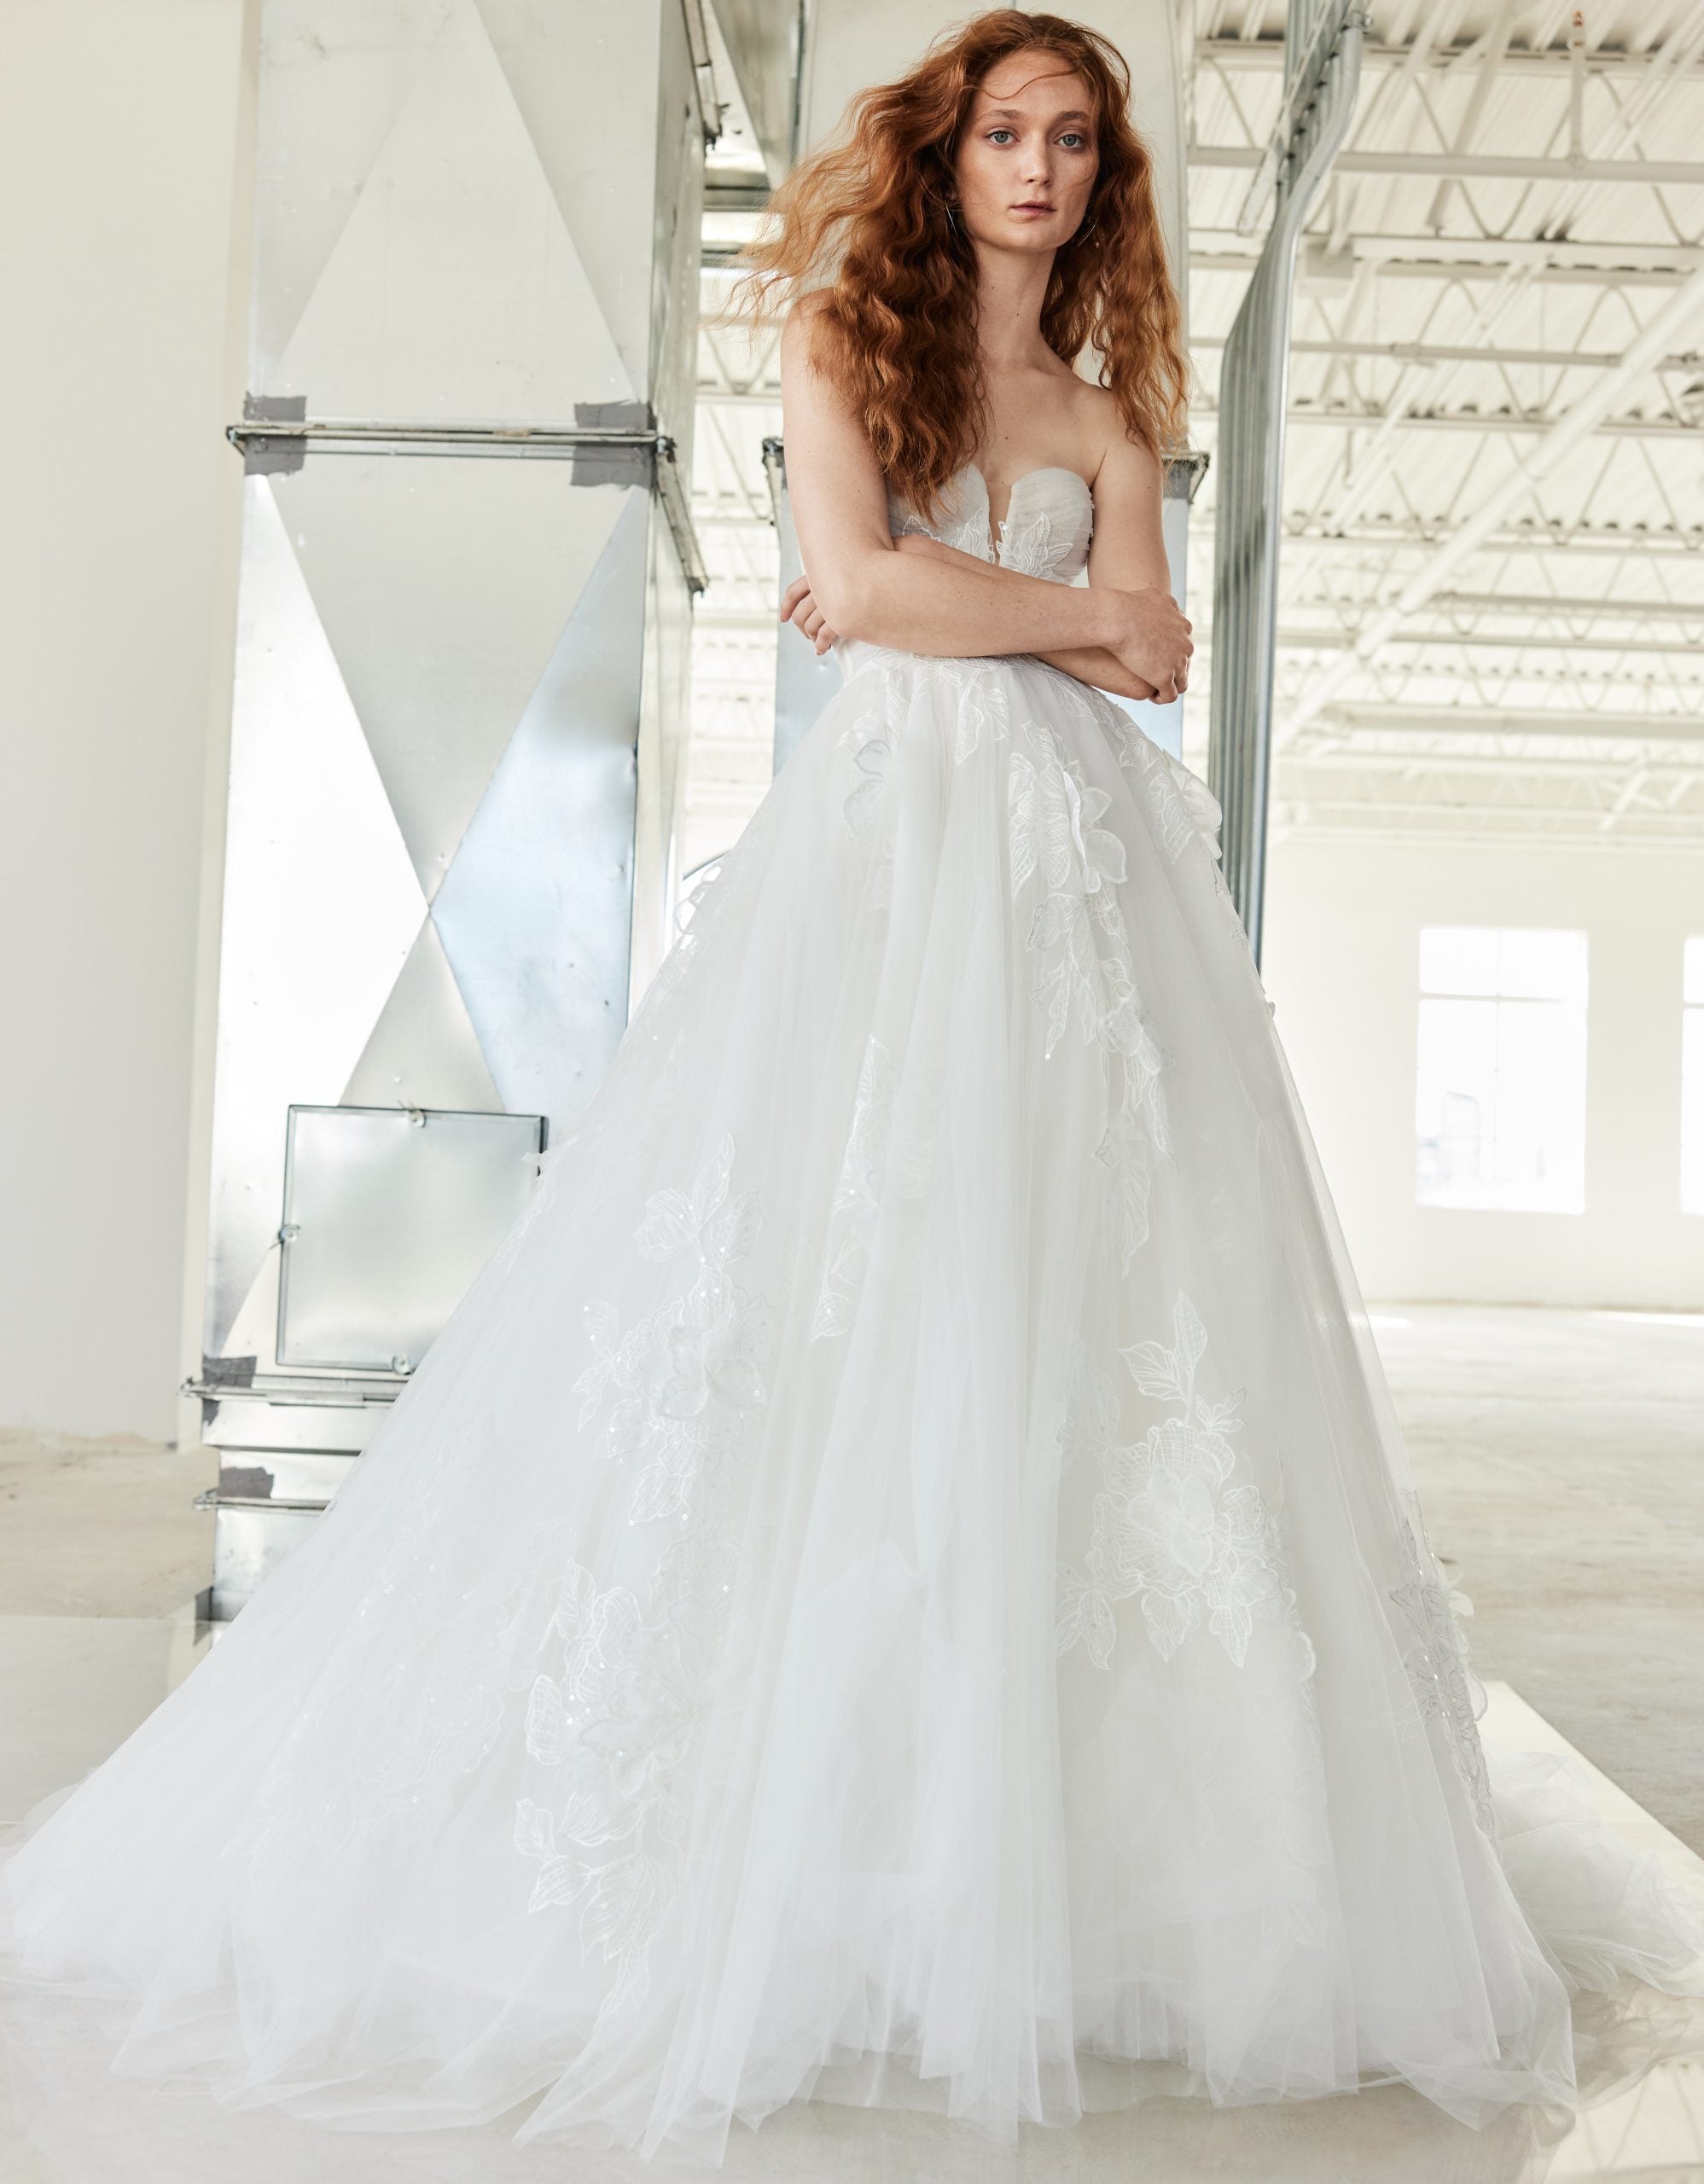 Romantic Tulle Floral Ball Gown by Rivini